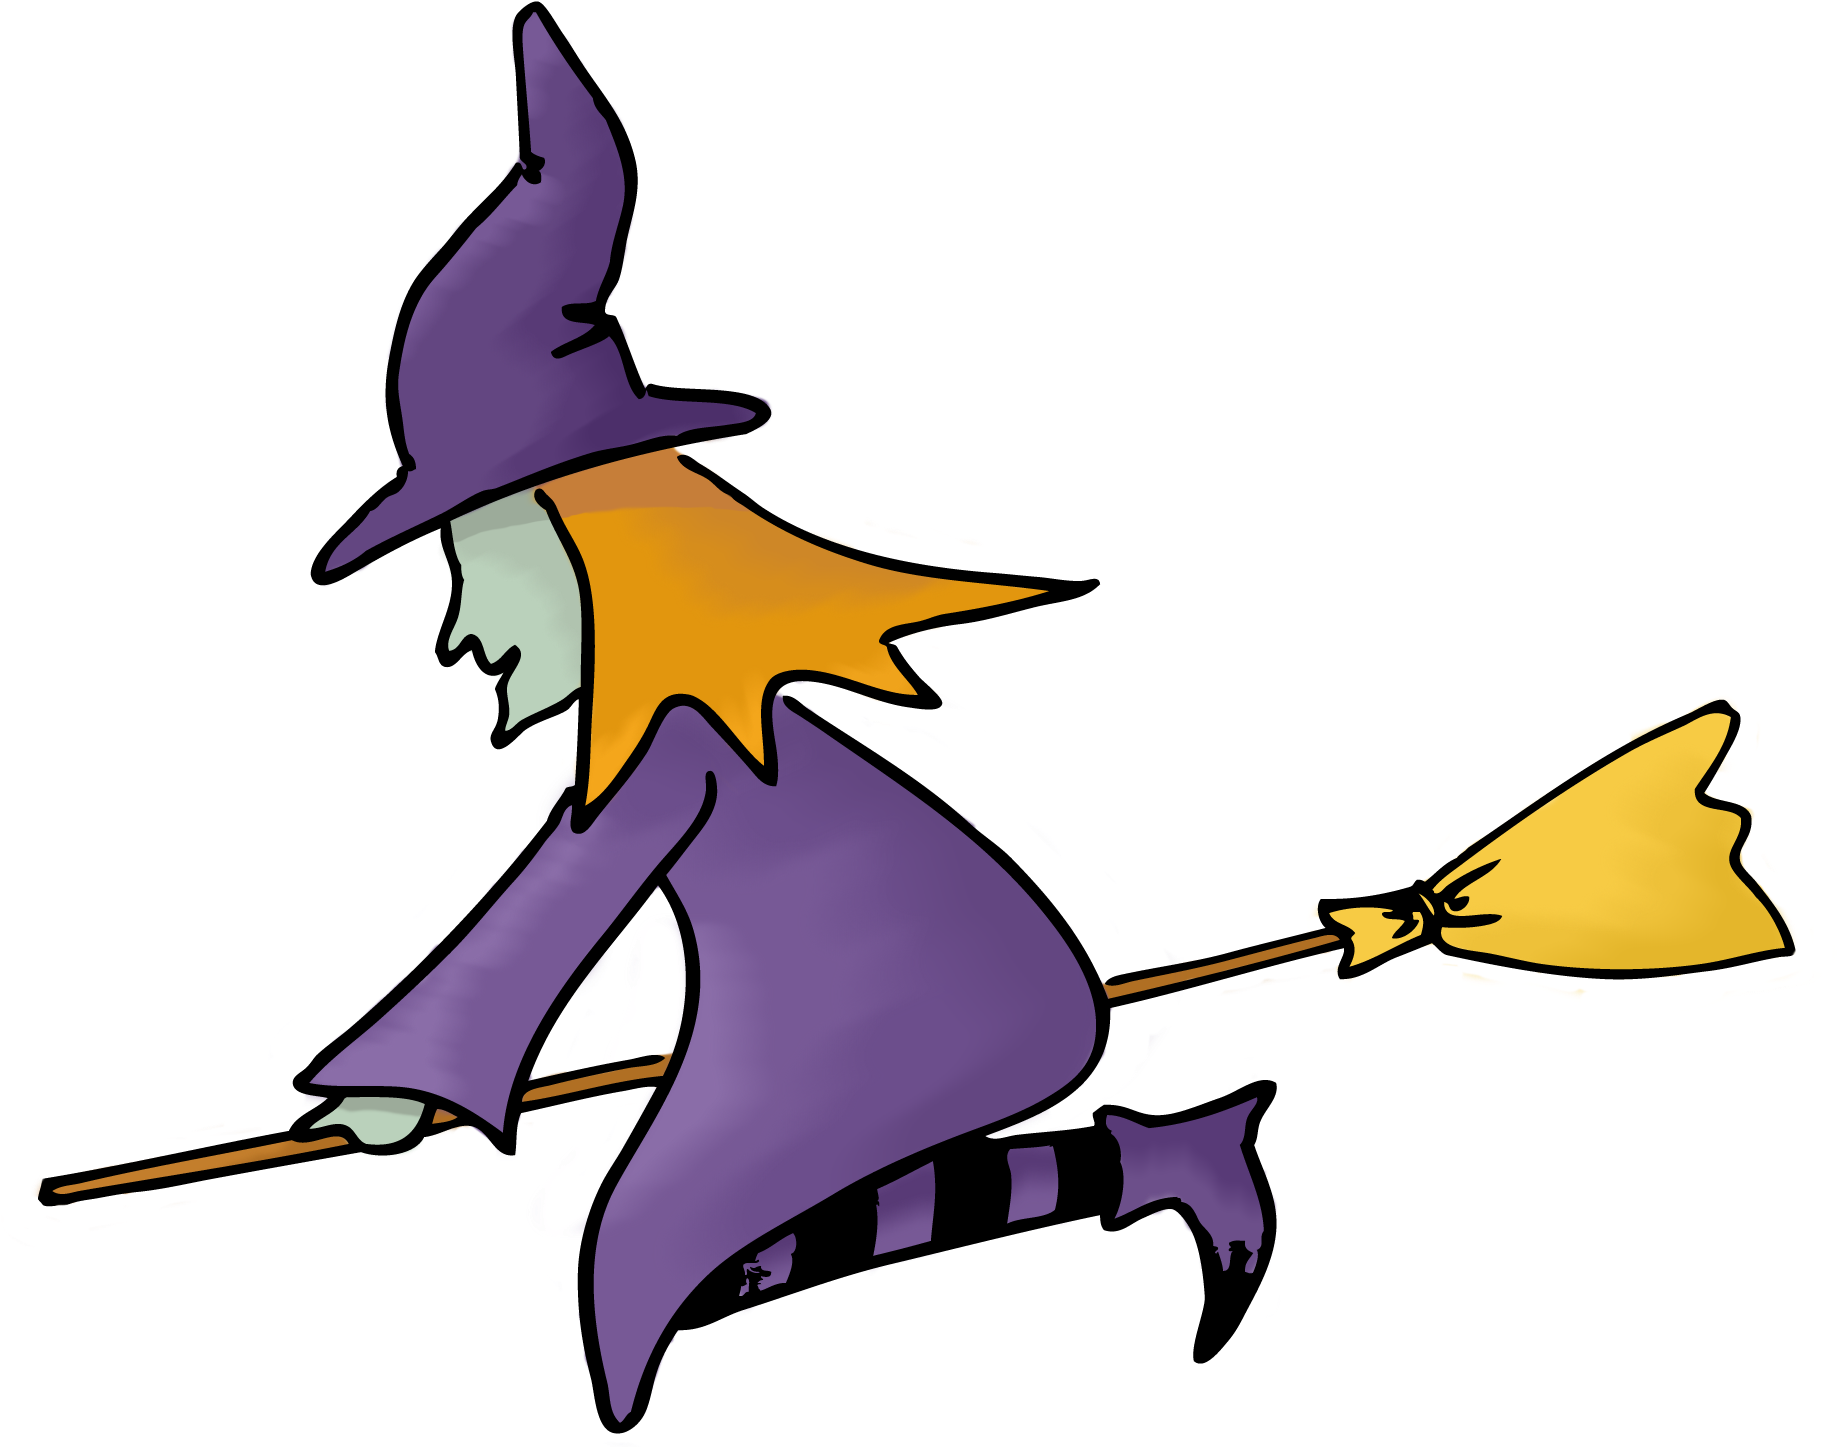 Cartoon Witch Flyingon Broomstick PNG